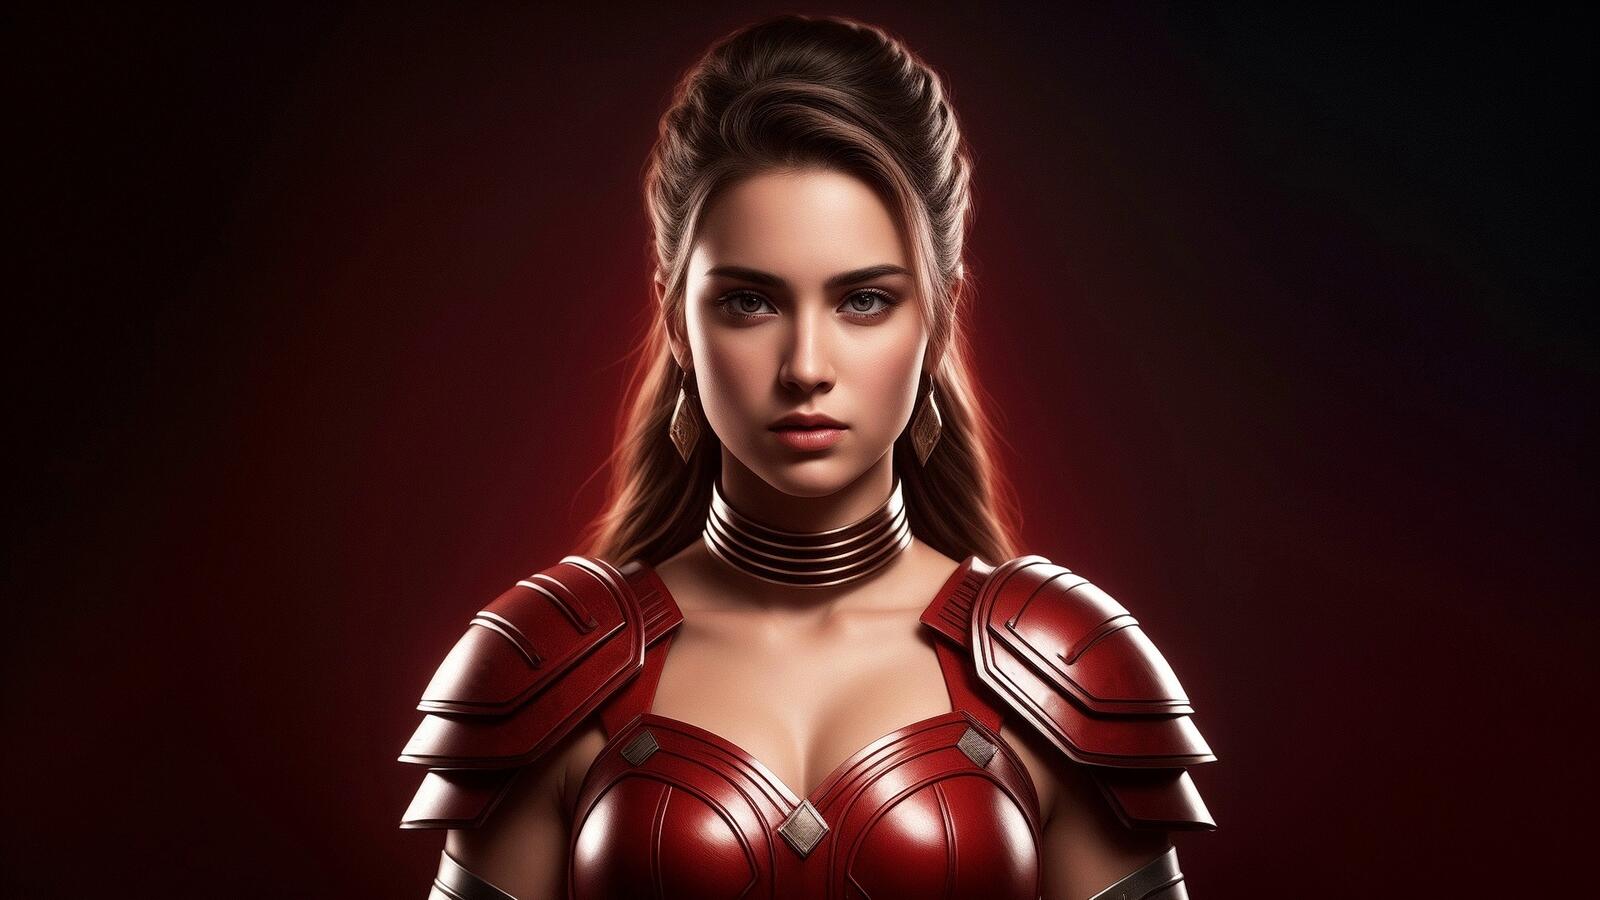 Free photo Portrait of a girl in armor on a red background